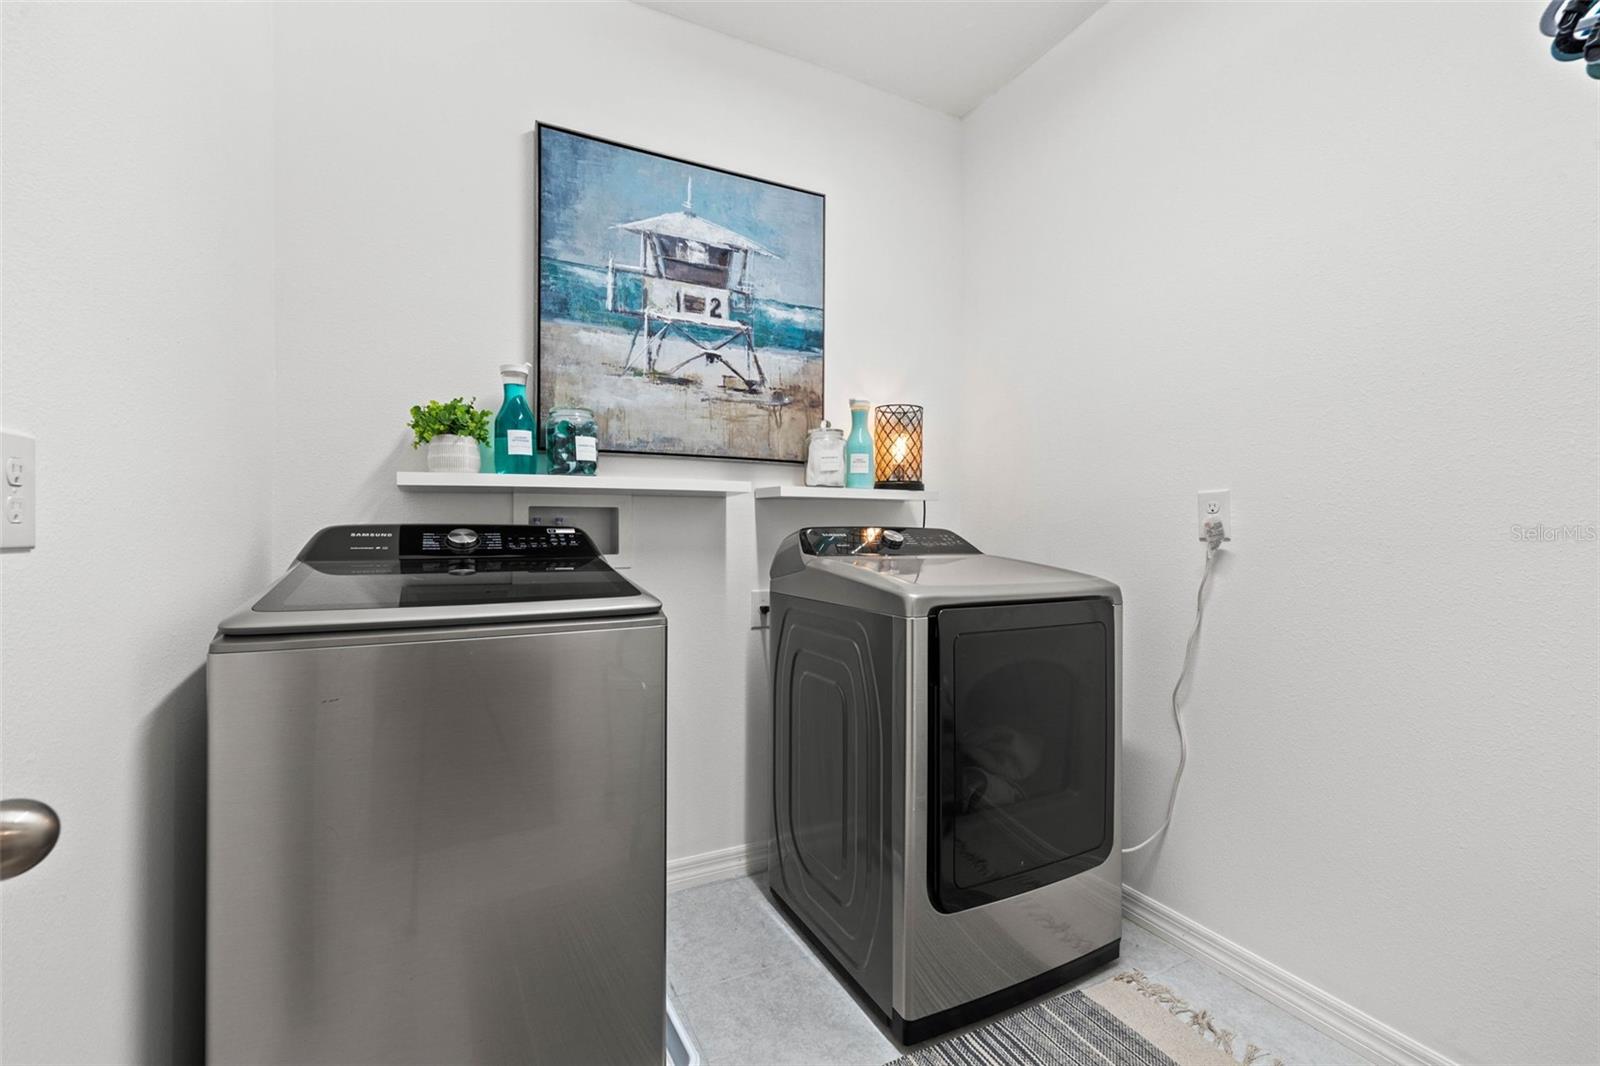 2020 LG Gas washer and dryer